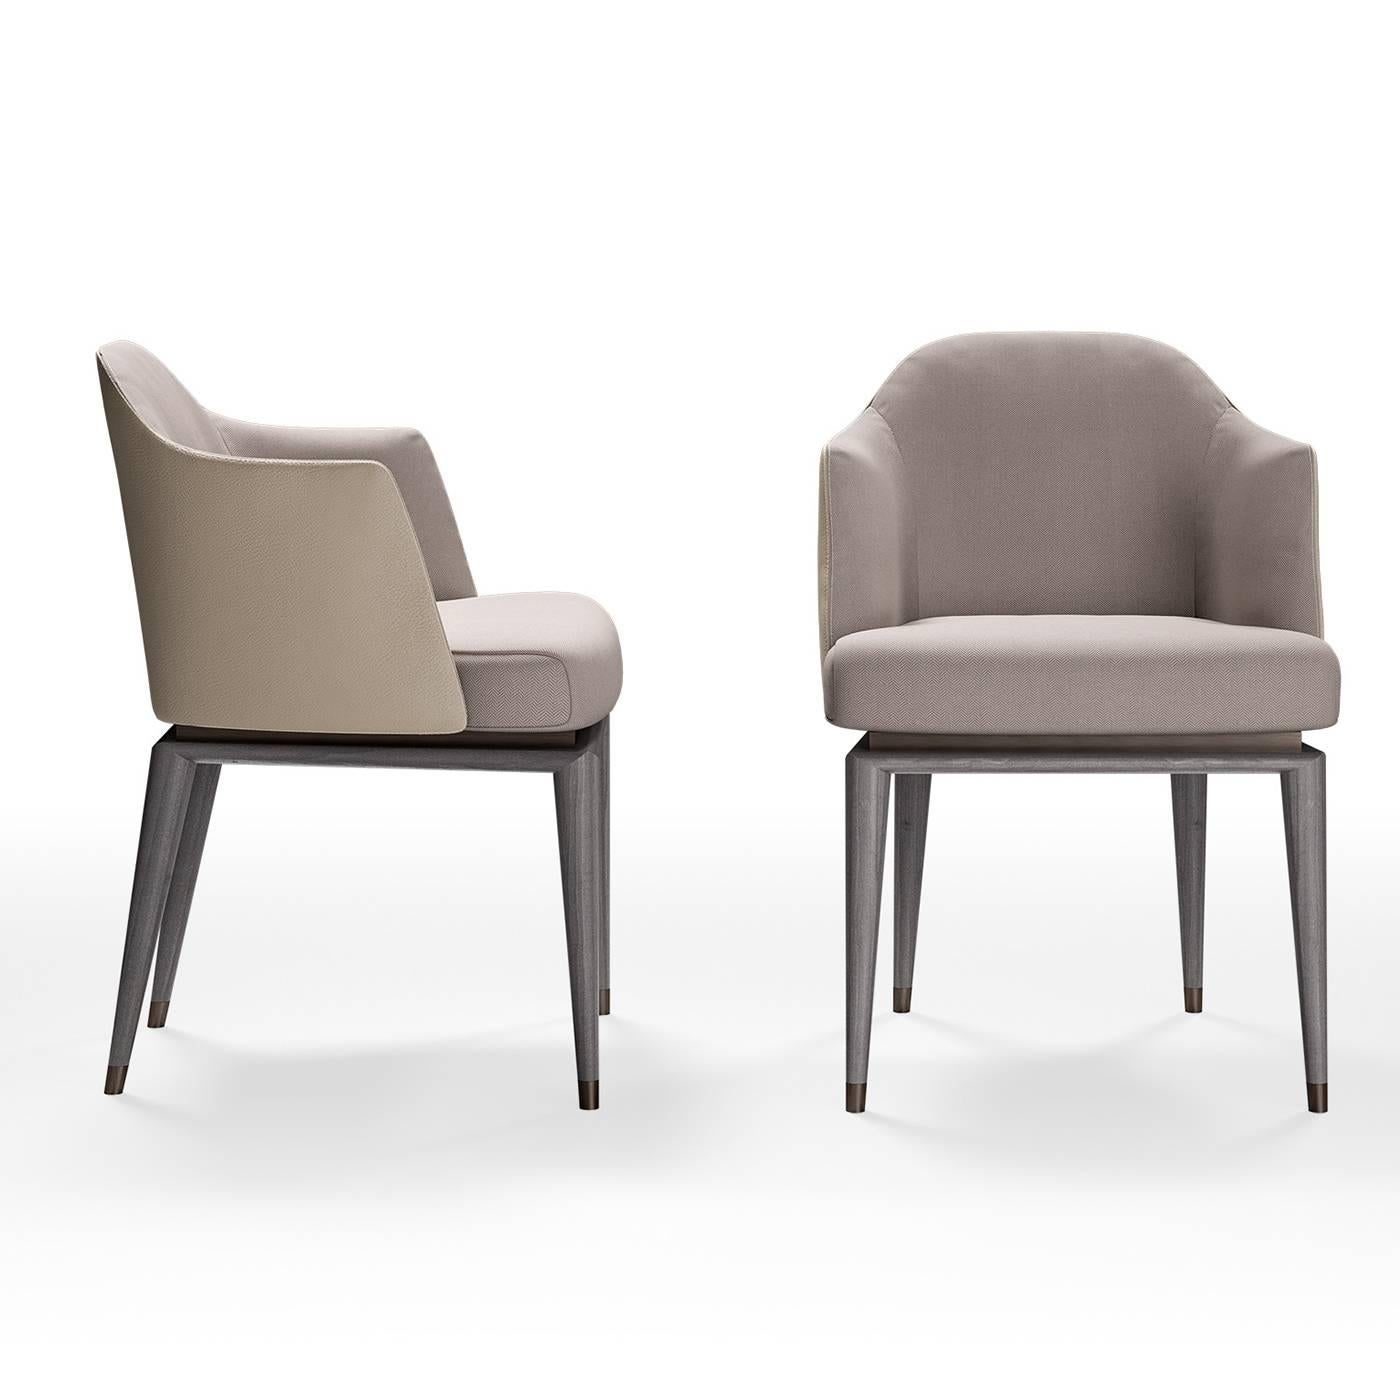 Simple and refined, this contemporary bergère-style armchair exudes comfort and elegance. Supported by four gray, conical feet with brass-finished metal ferules, the elegant frame has closed armrests and is upholstered with gray fabric on the inside